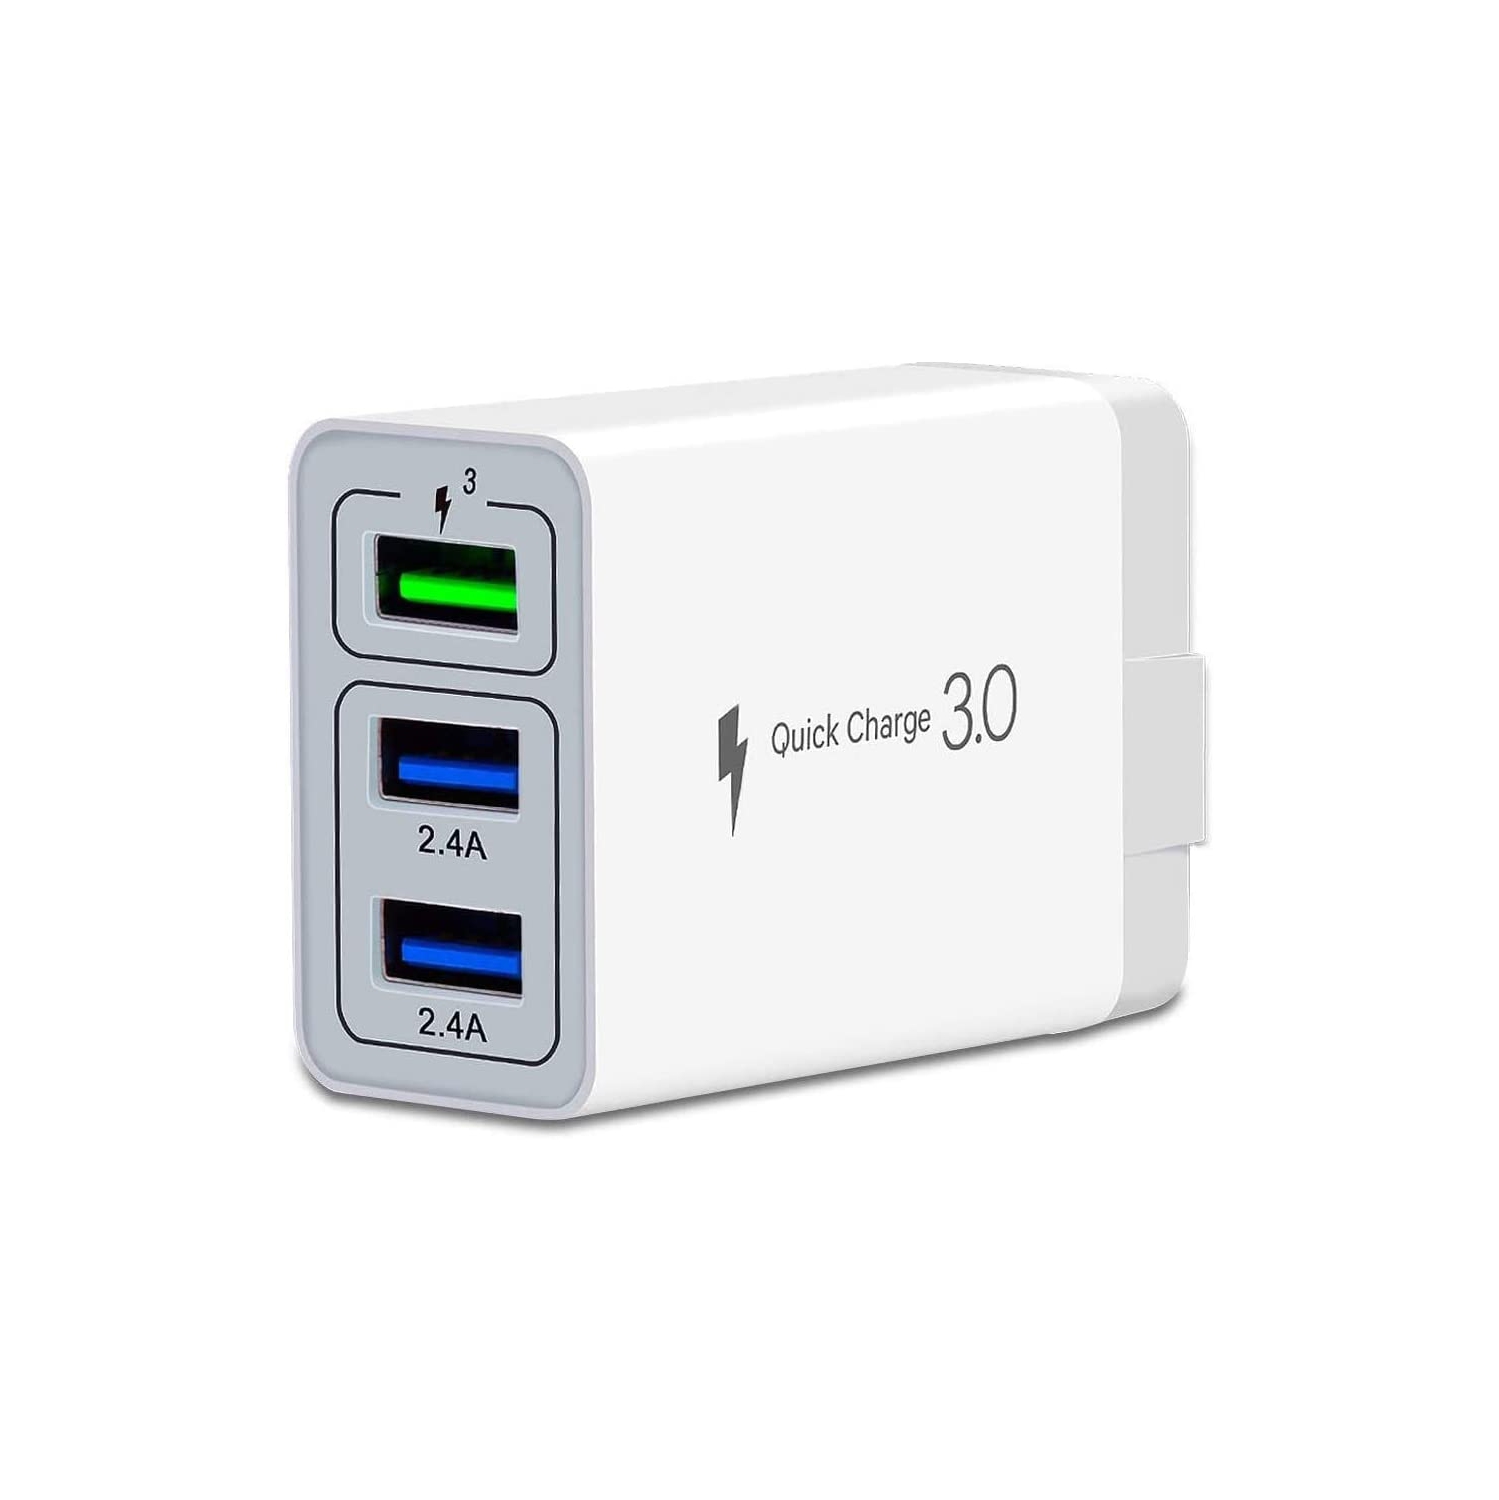 Wall Charger Fast Adapter,QC 3.0 USB Fast Wall Charger 3 Ports Tablet iPad Phone Fast Charger Adapter Quick Charge 3.0